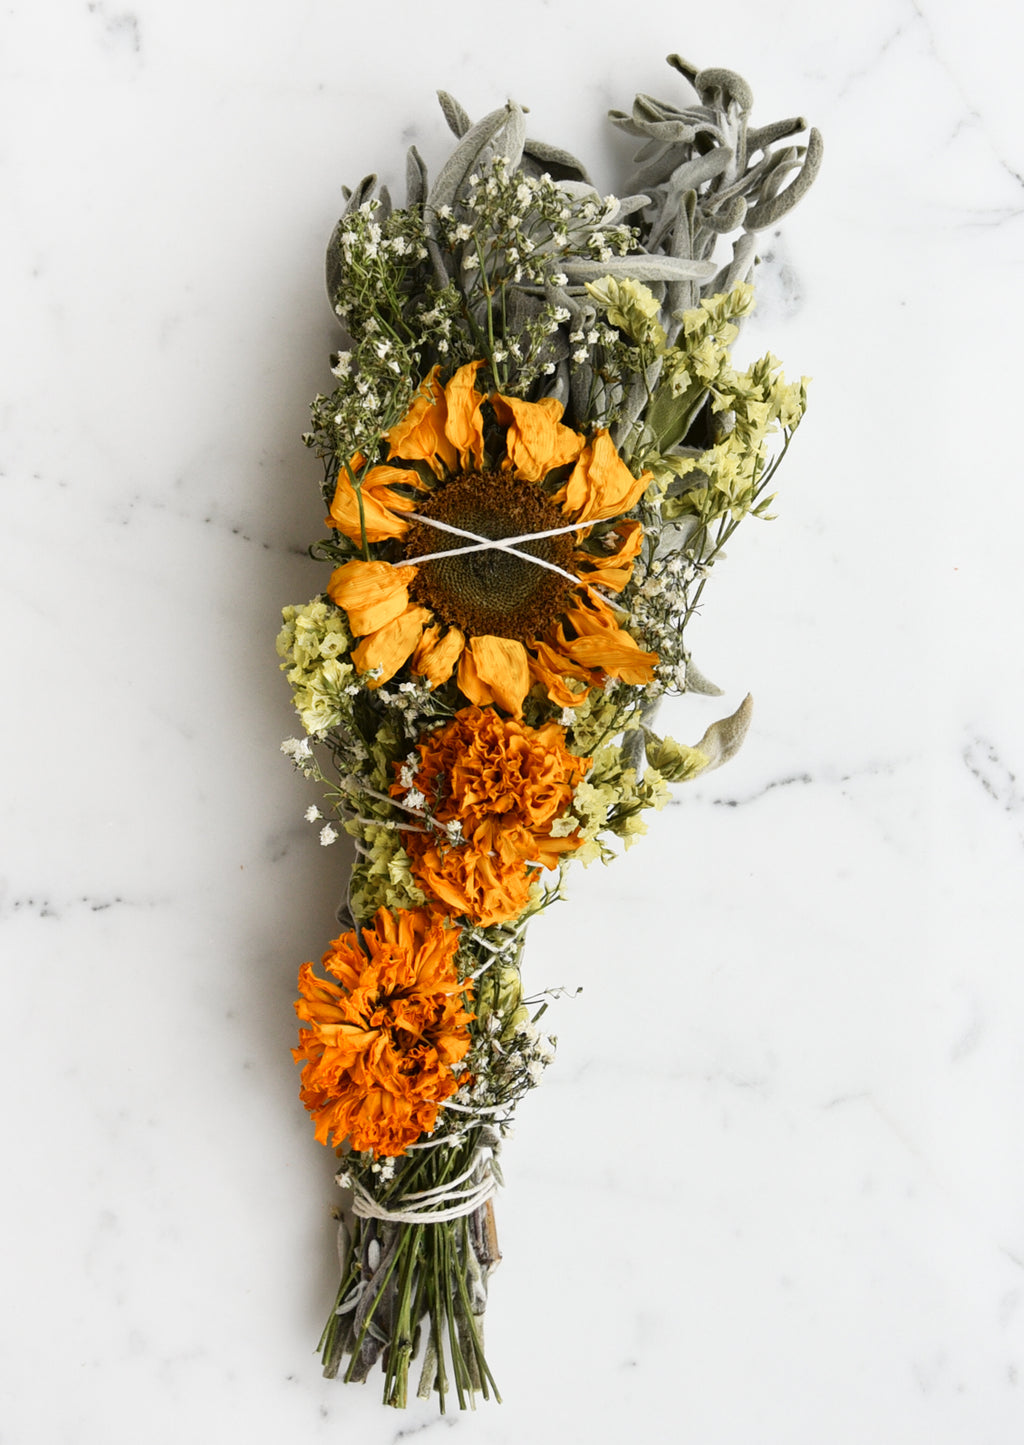 Marigold: An extra large smudge bundle with sage, marigolds, and a single sunflower